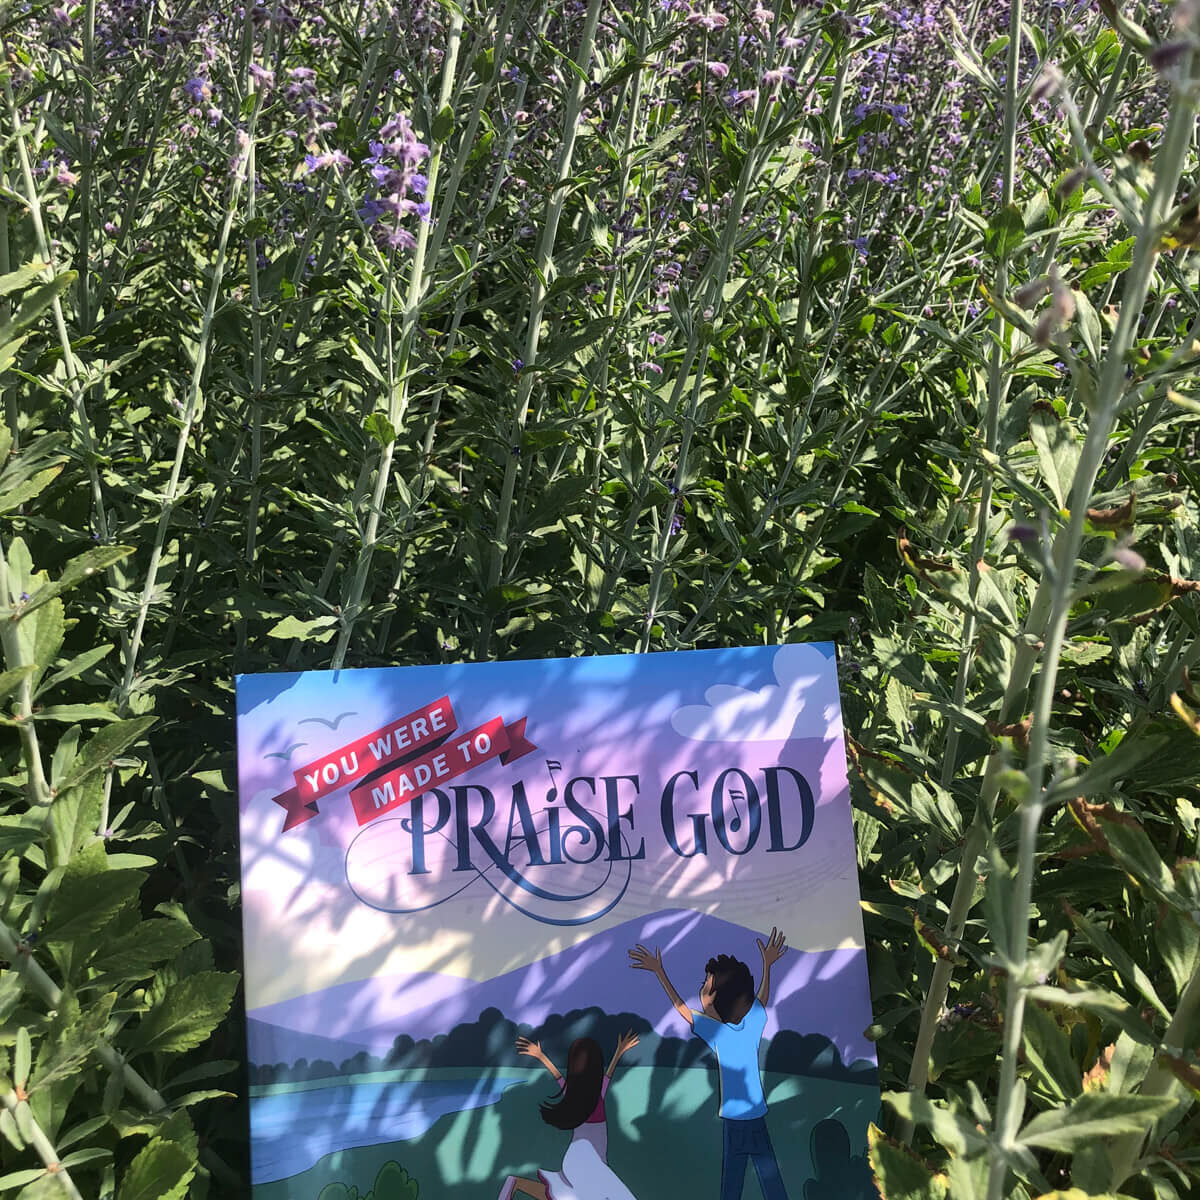 Book You Were Made to Praise God in a lavander field